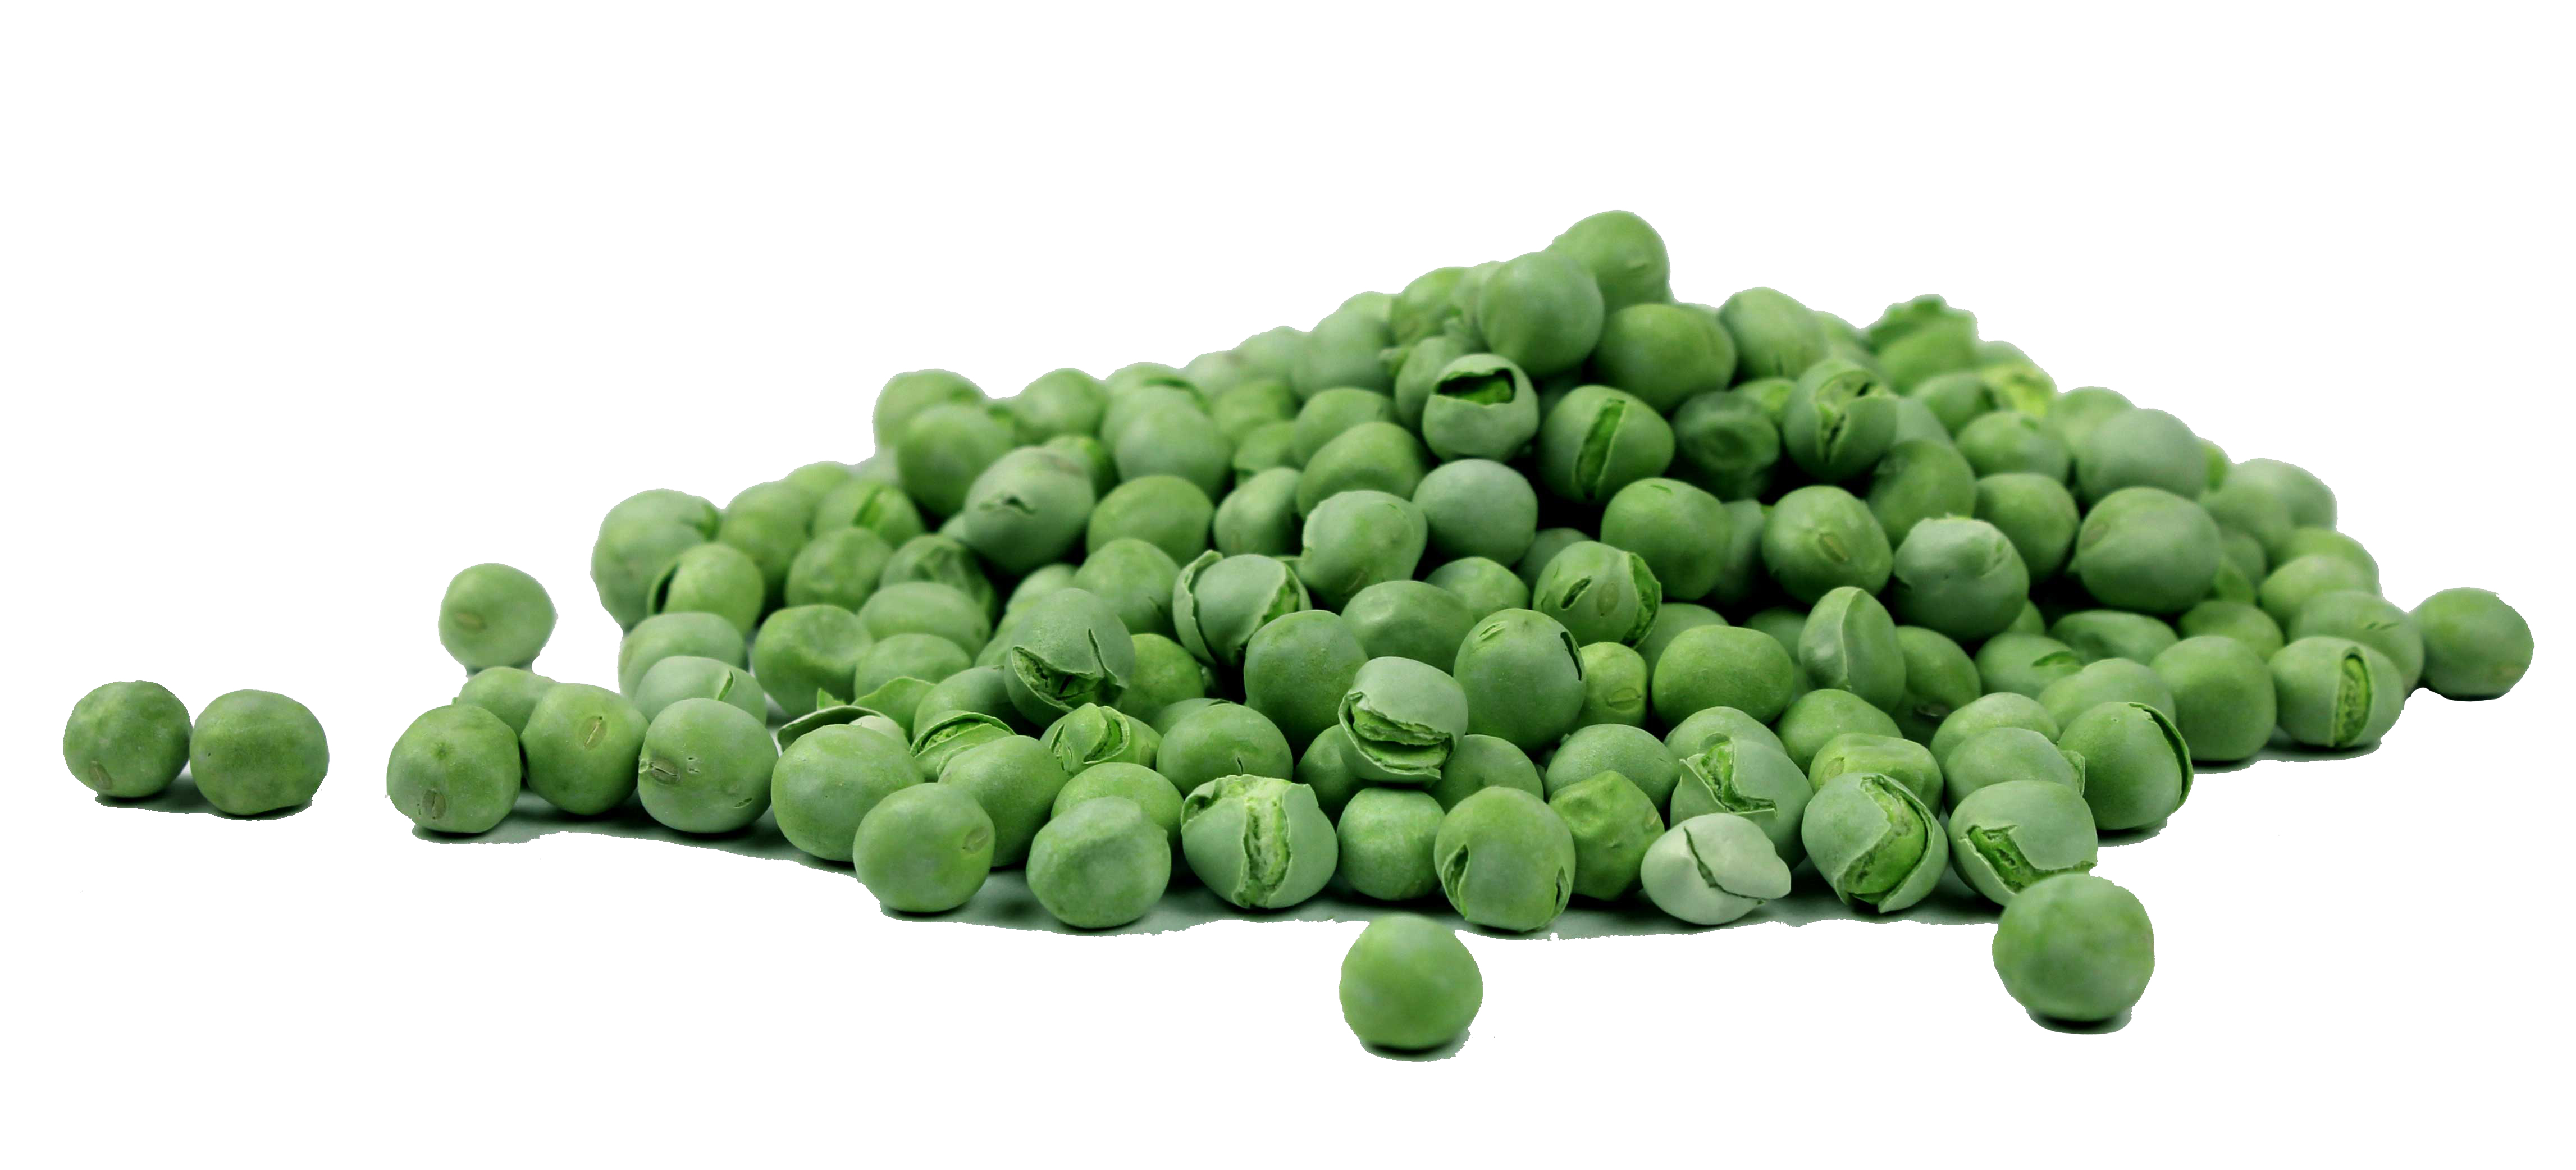 Dry Beans PNG - 161275